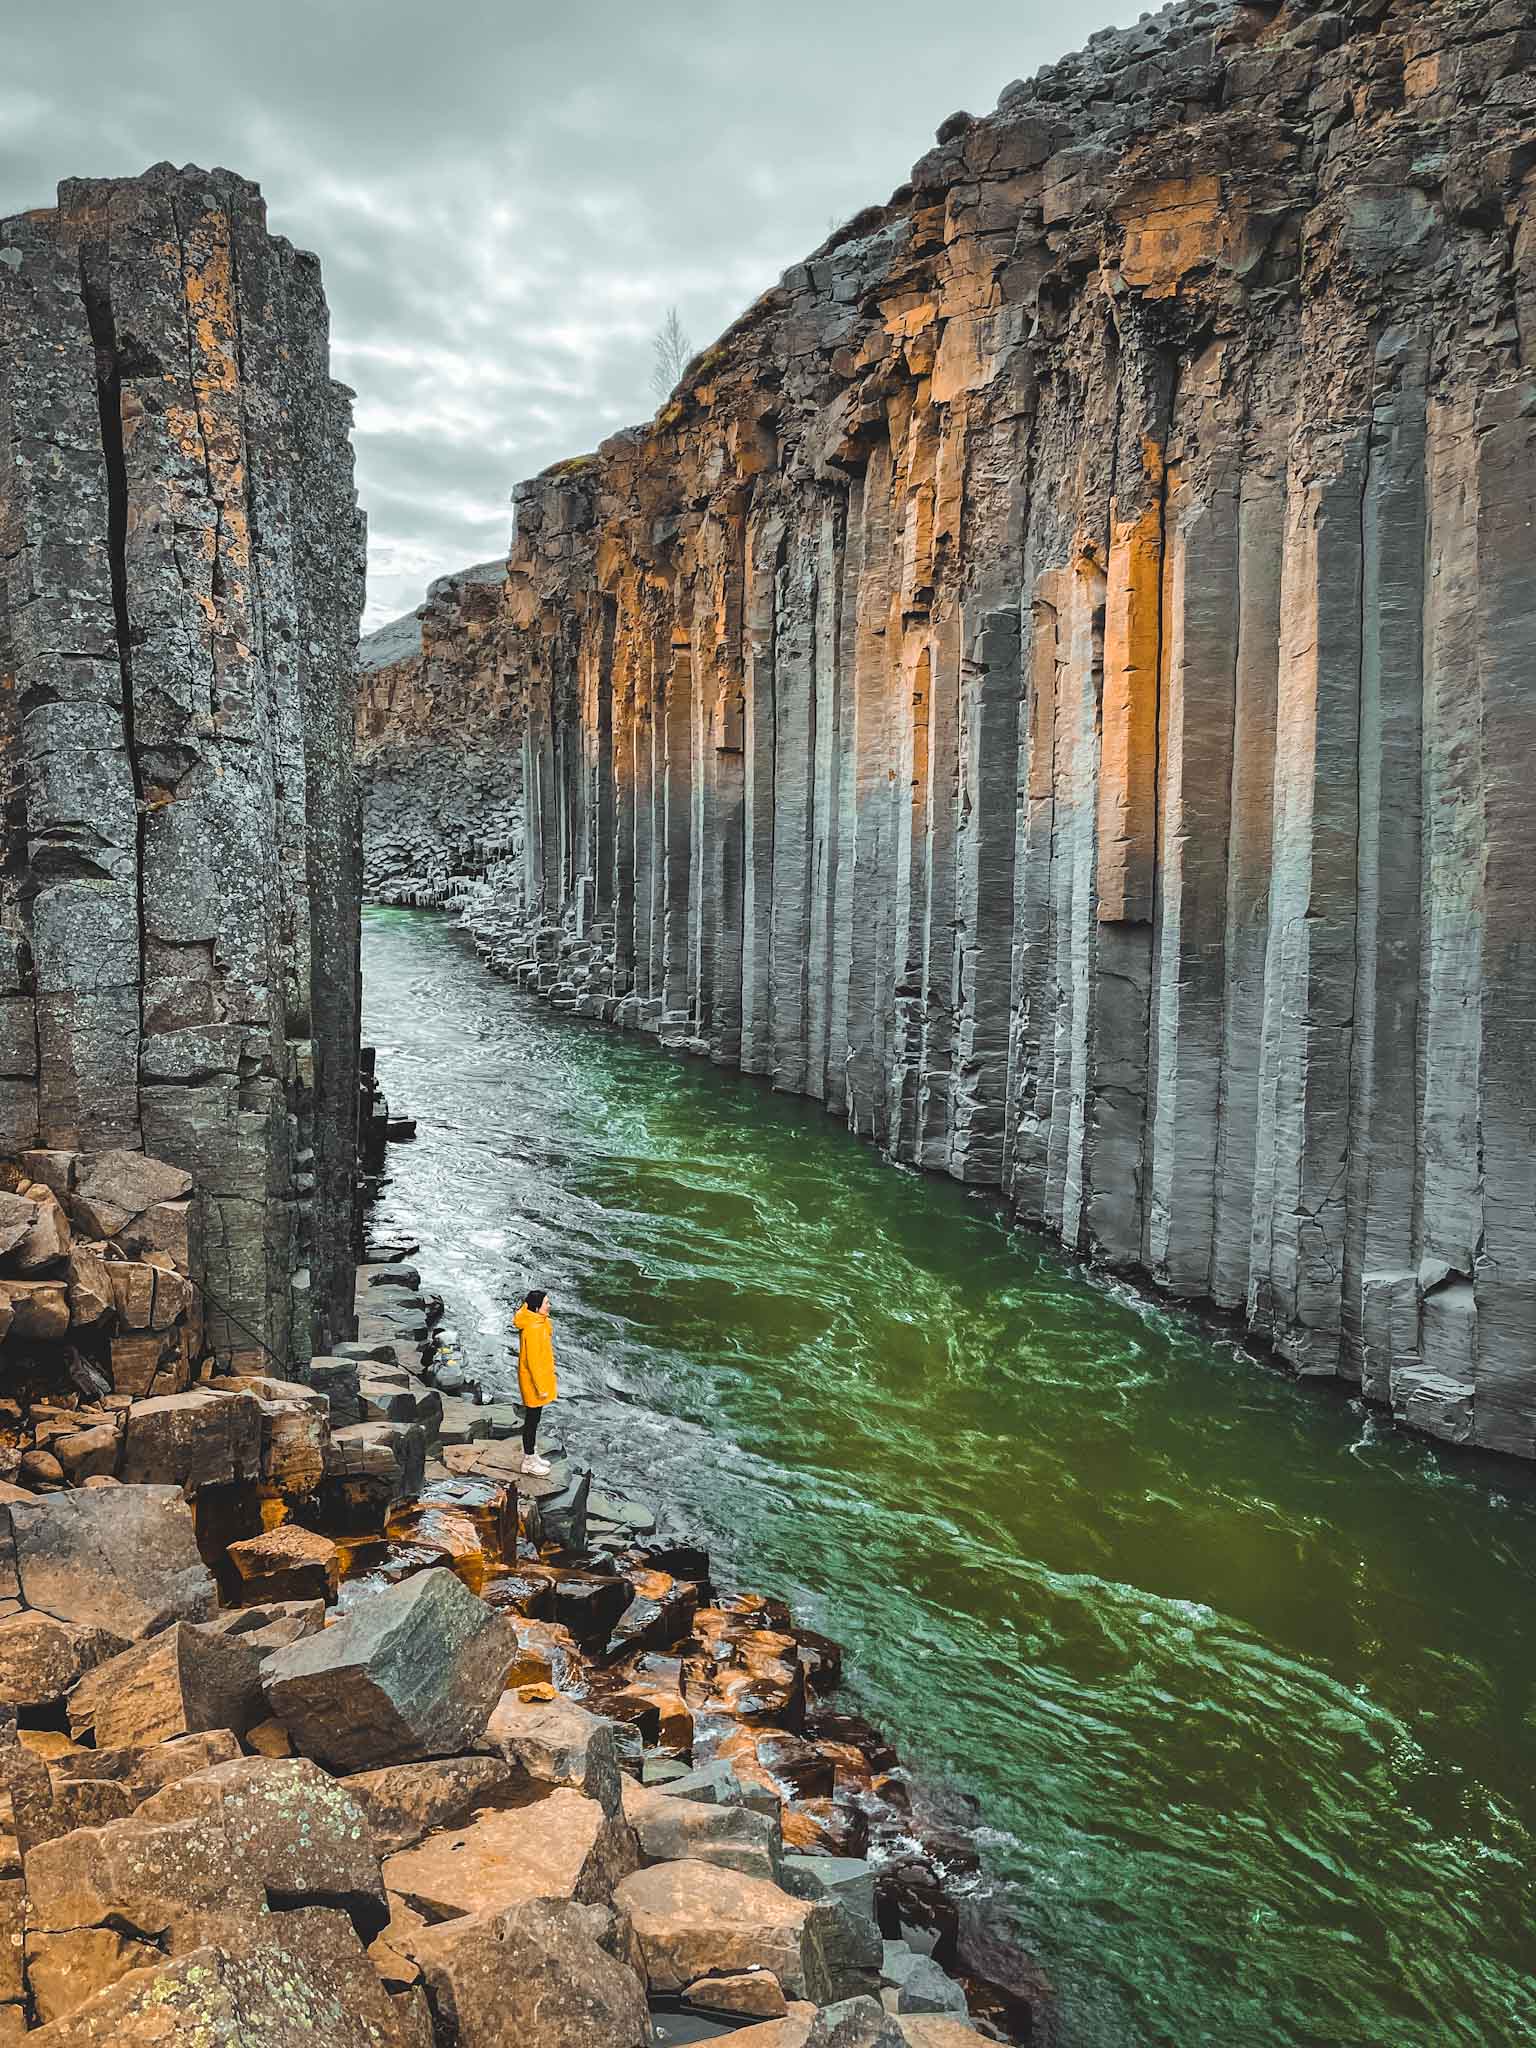 Unique spots and hidden gems - Studlagil canyon in iceland with the basalt columns